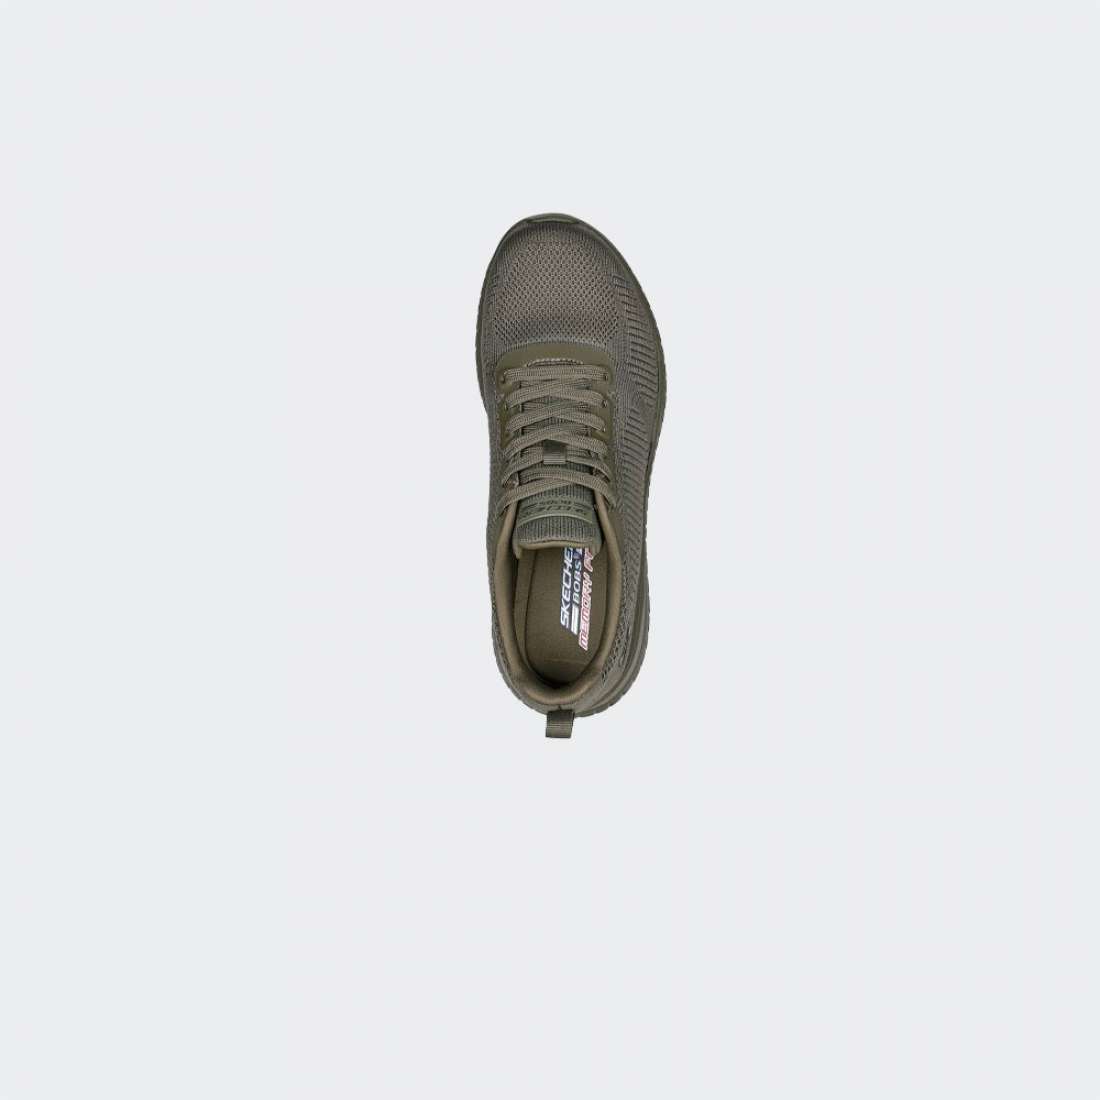 SKECHERS BOBS SQUAD CHAOS FACE OFF OLIVE